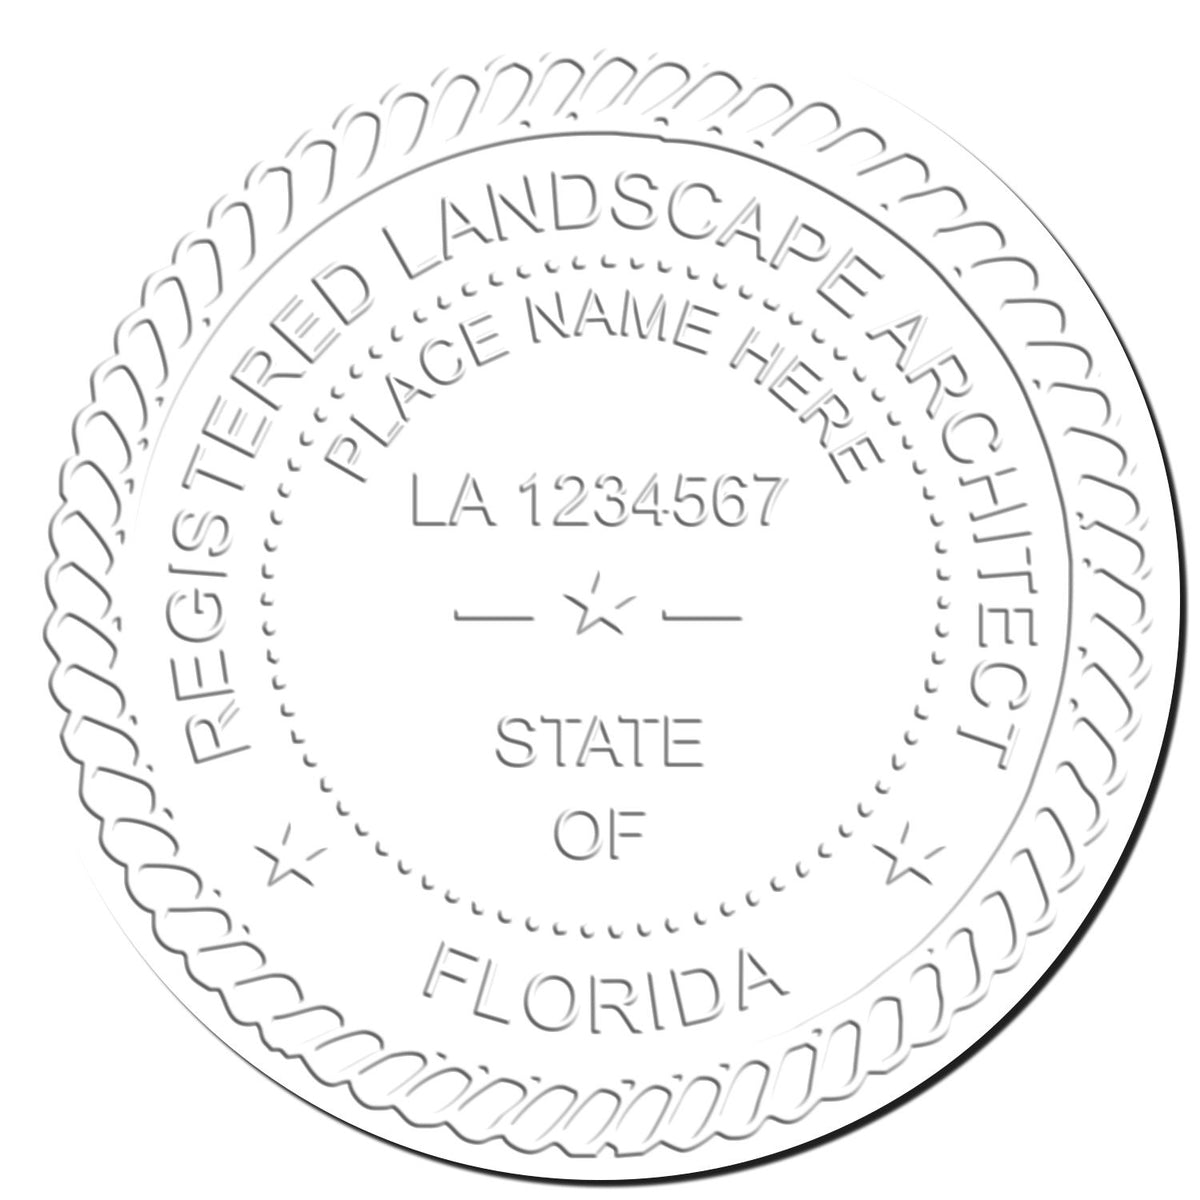 This paper is stamped with a sample imprint of the Hybrid Florida Landscape Architect Seal, signifying its quality and reliability.